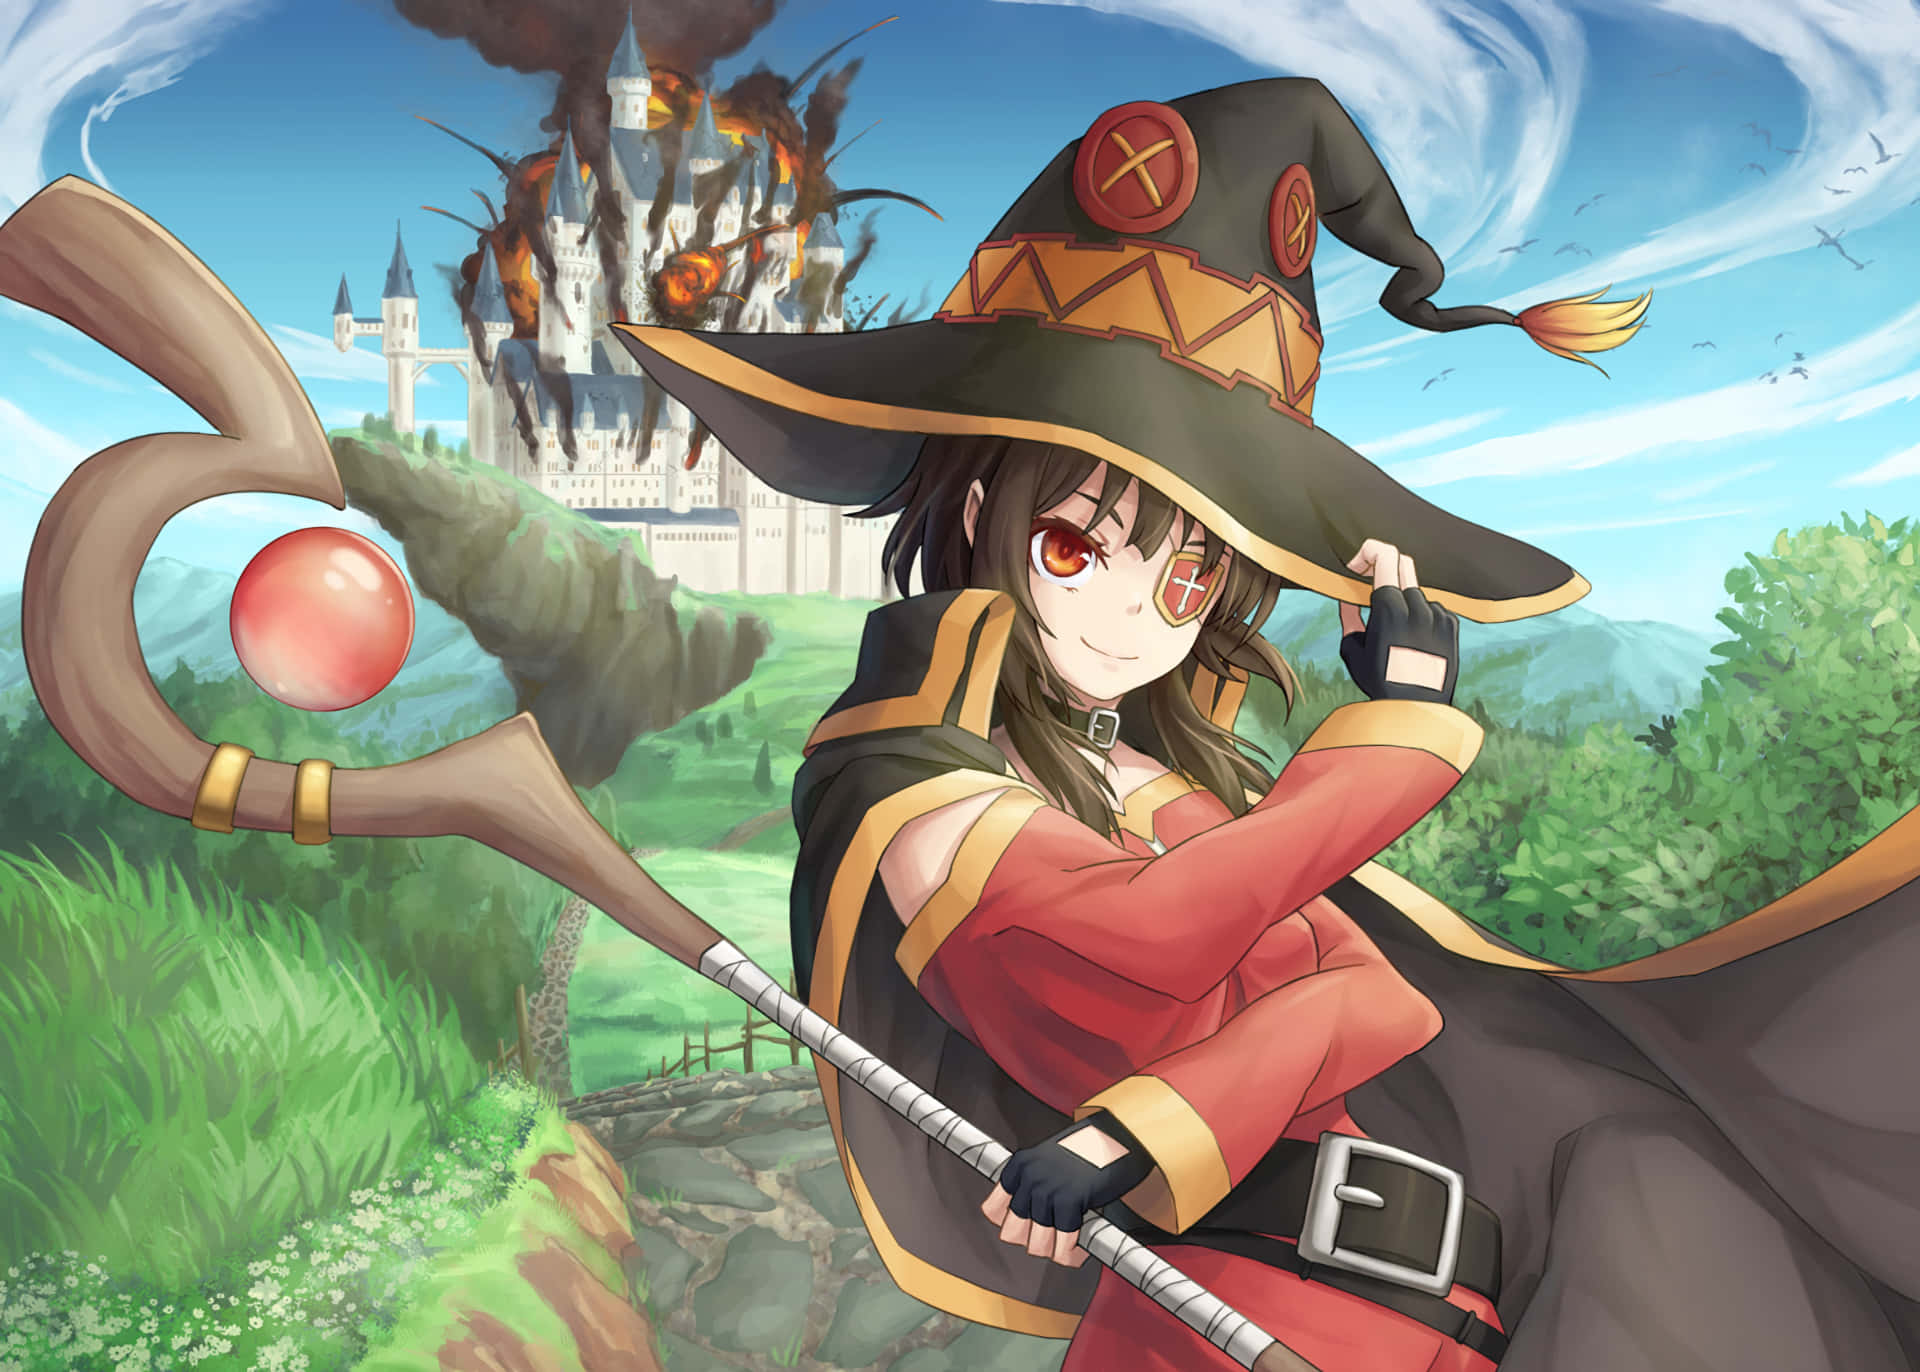 Wiz and Megumin set off on a dangerous quest to save Lake Eris!